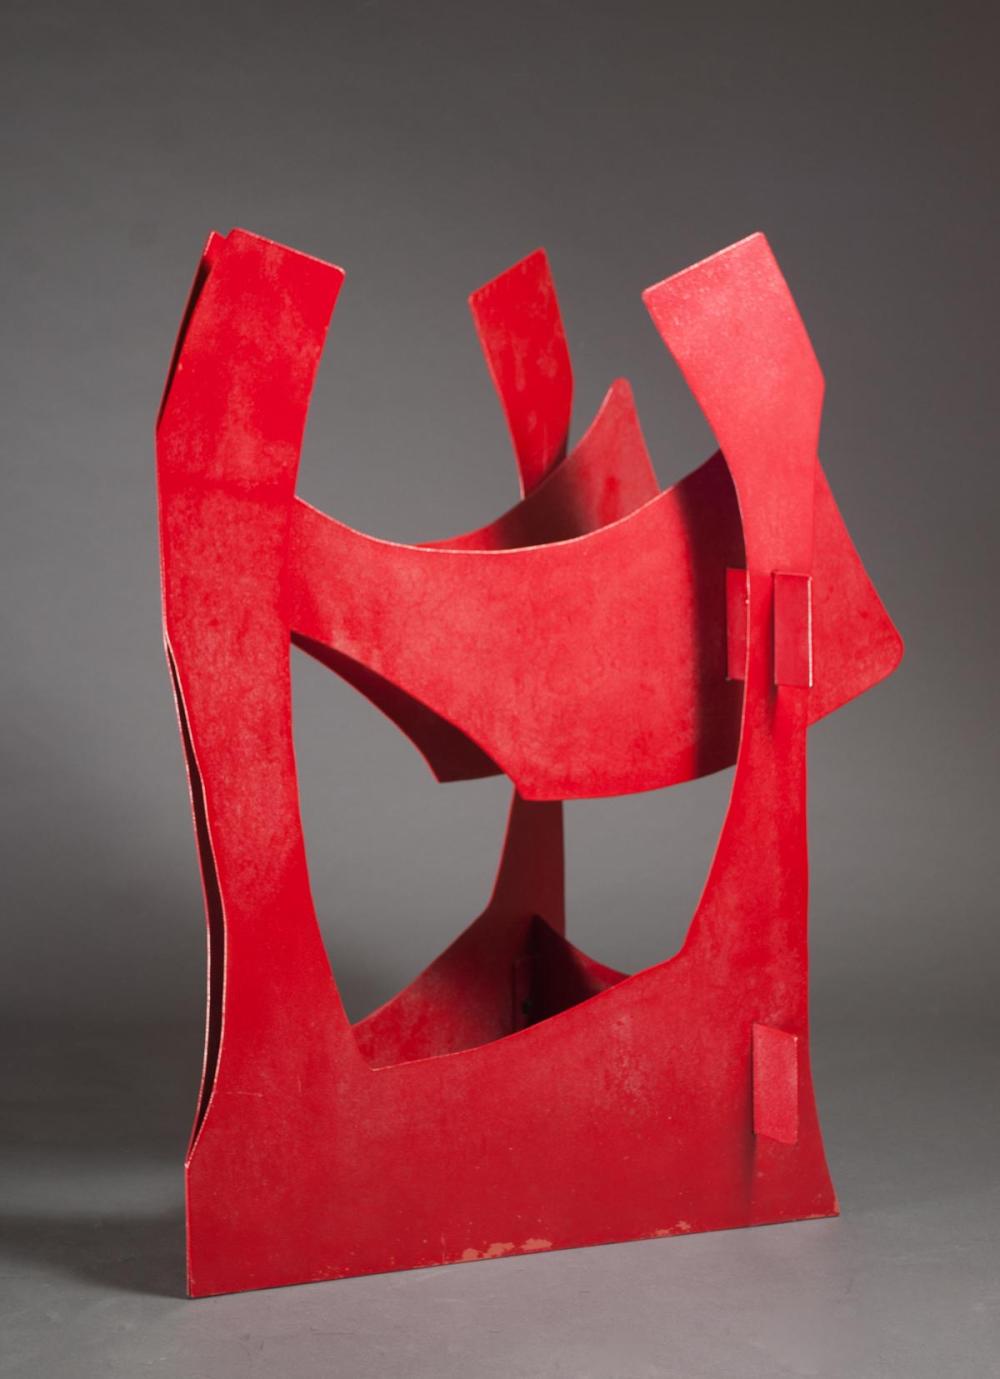 RED PAINTED IRON SCULPTURE, ABSTRACT